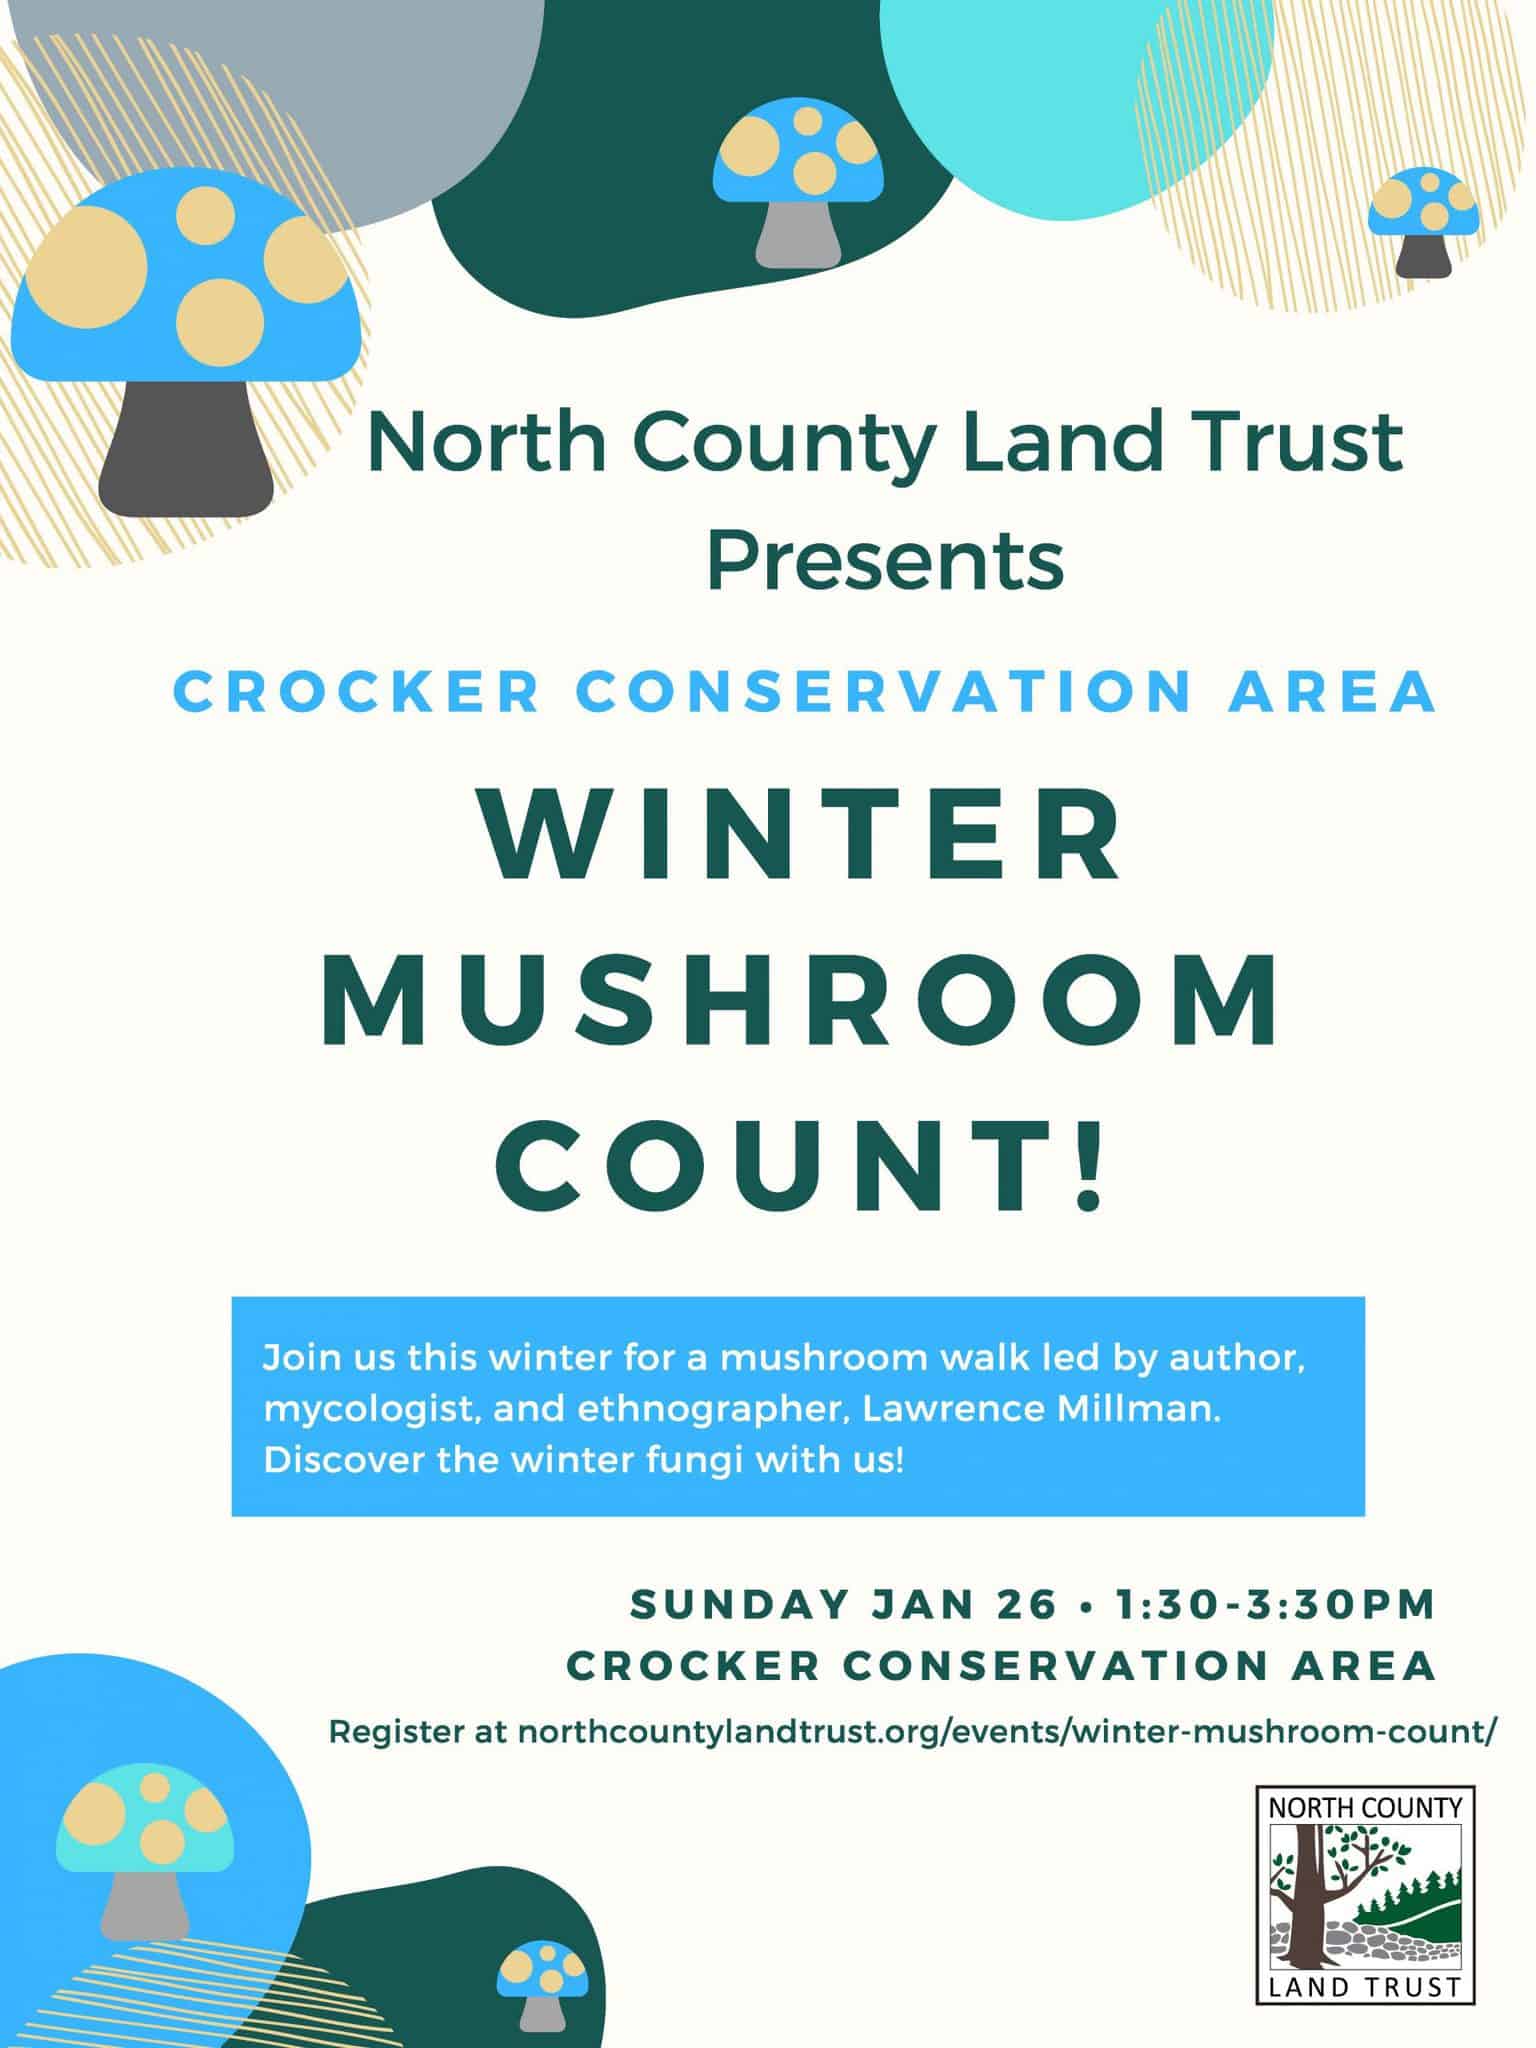 Winter Mushroom Count with Lawrence Millman